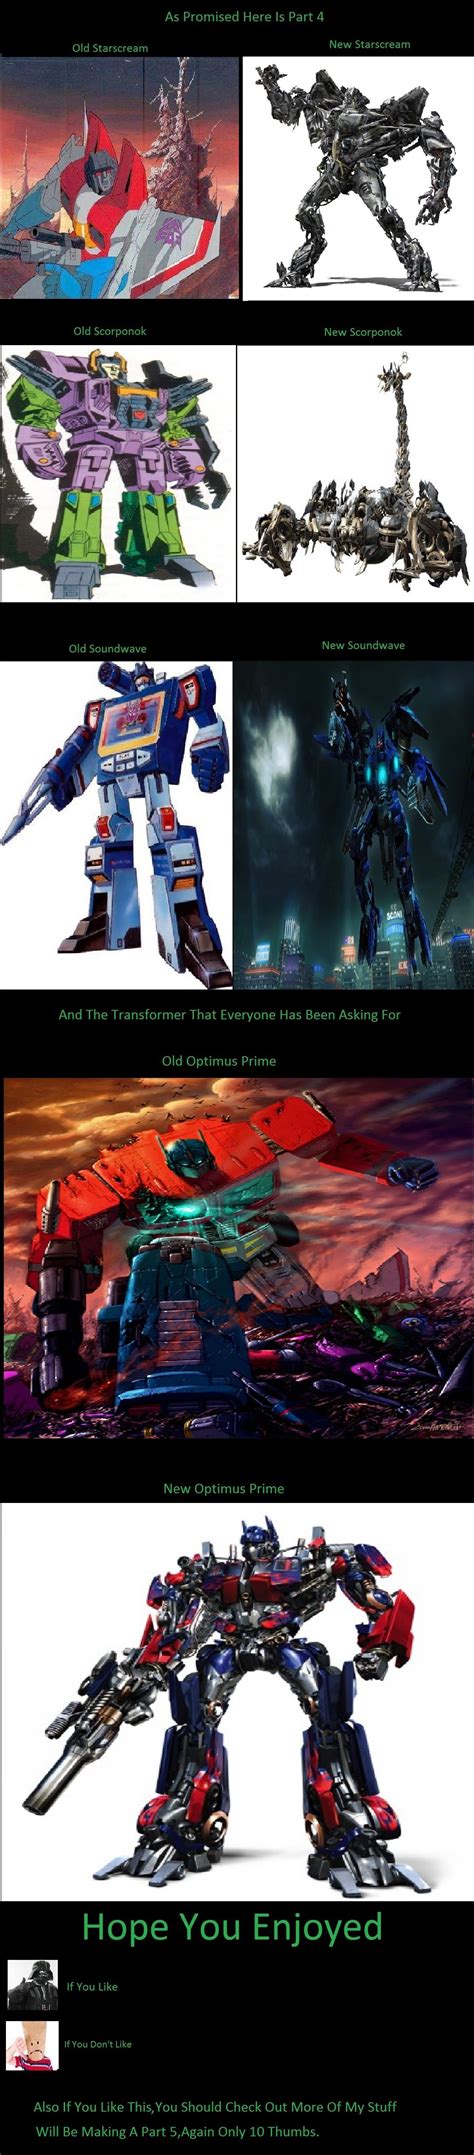 transformers prime funny pictures and best jokes comics images video humor animation